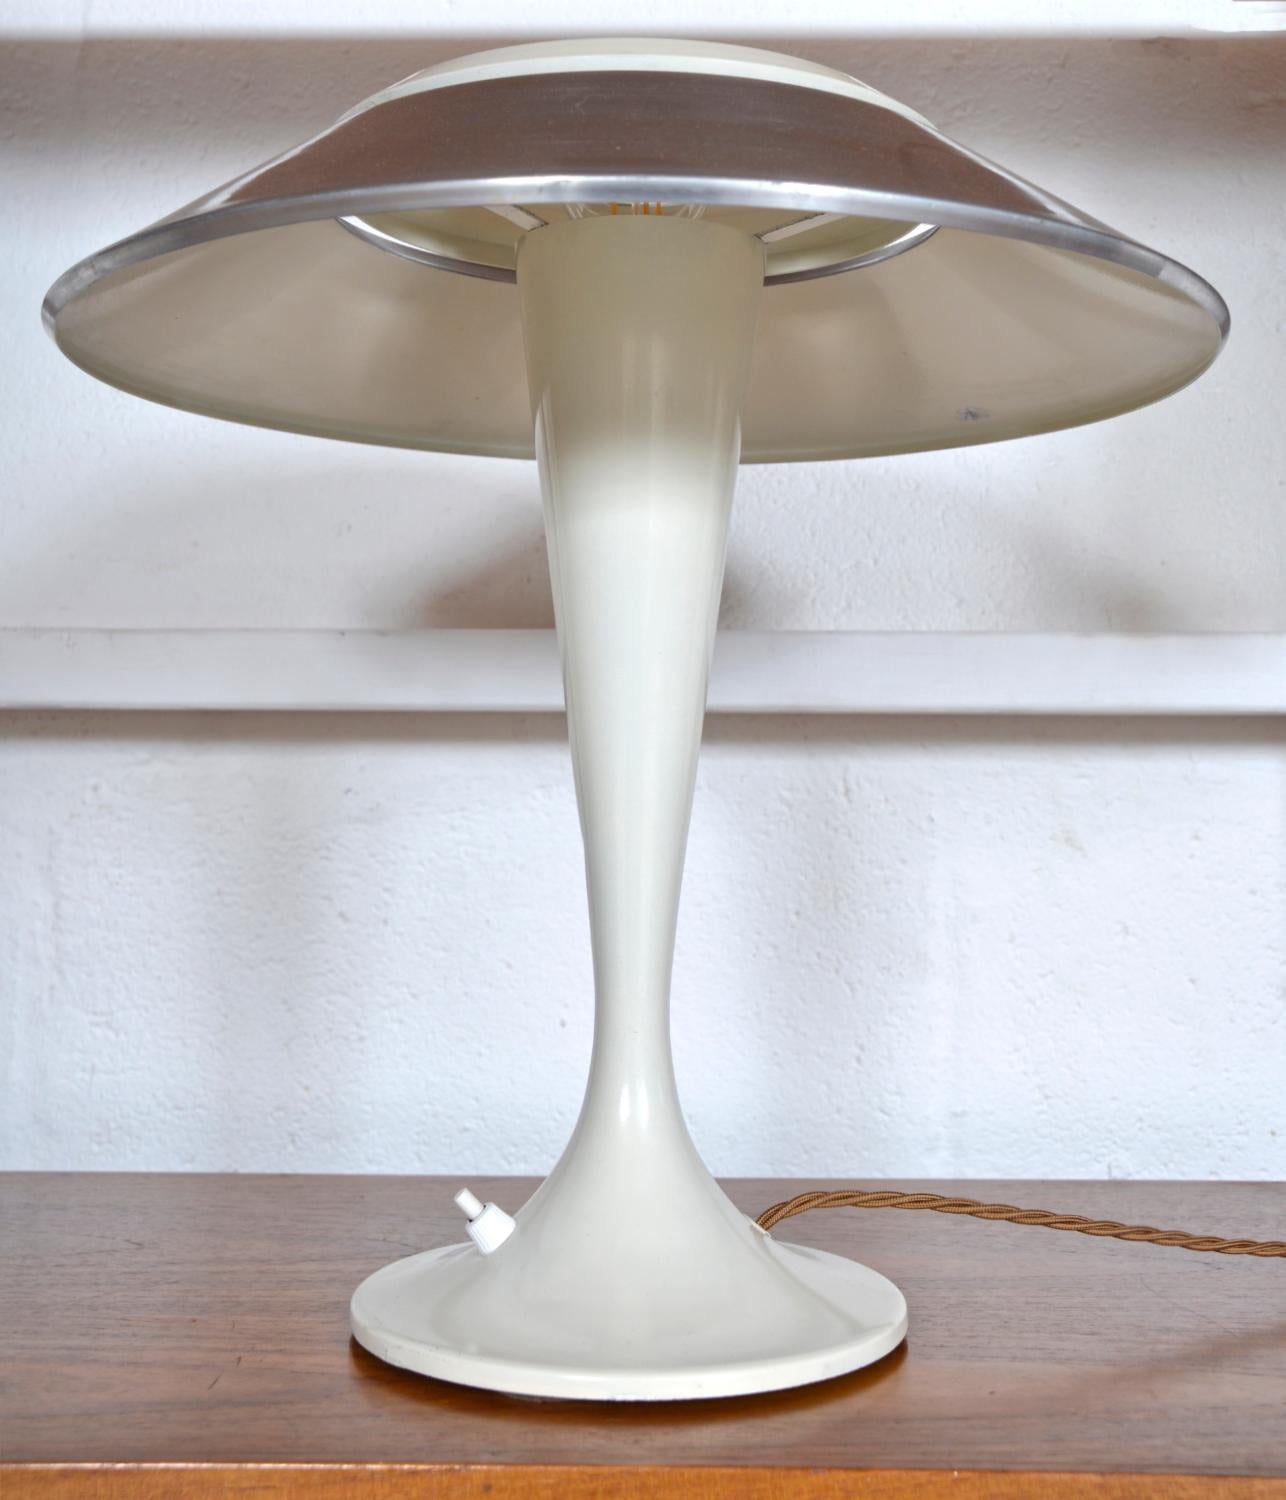 1960s Arlus French Space Age Chrome White Retro Table Desk Lamp Midcentury  In Good Condition For Sale In Sherborne, Dorset